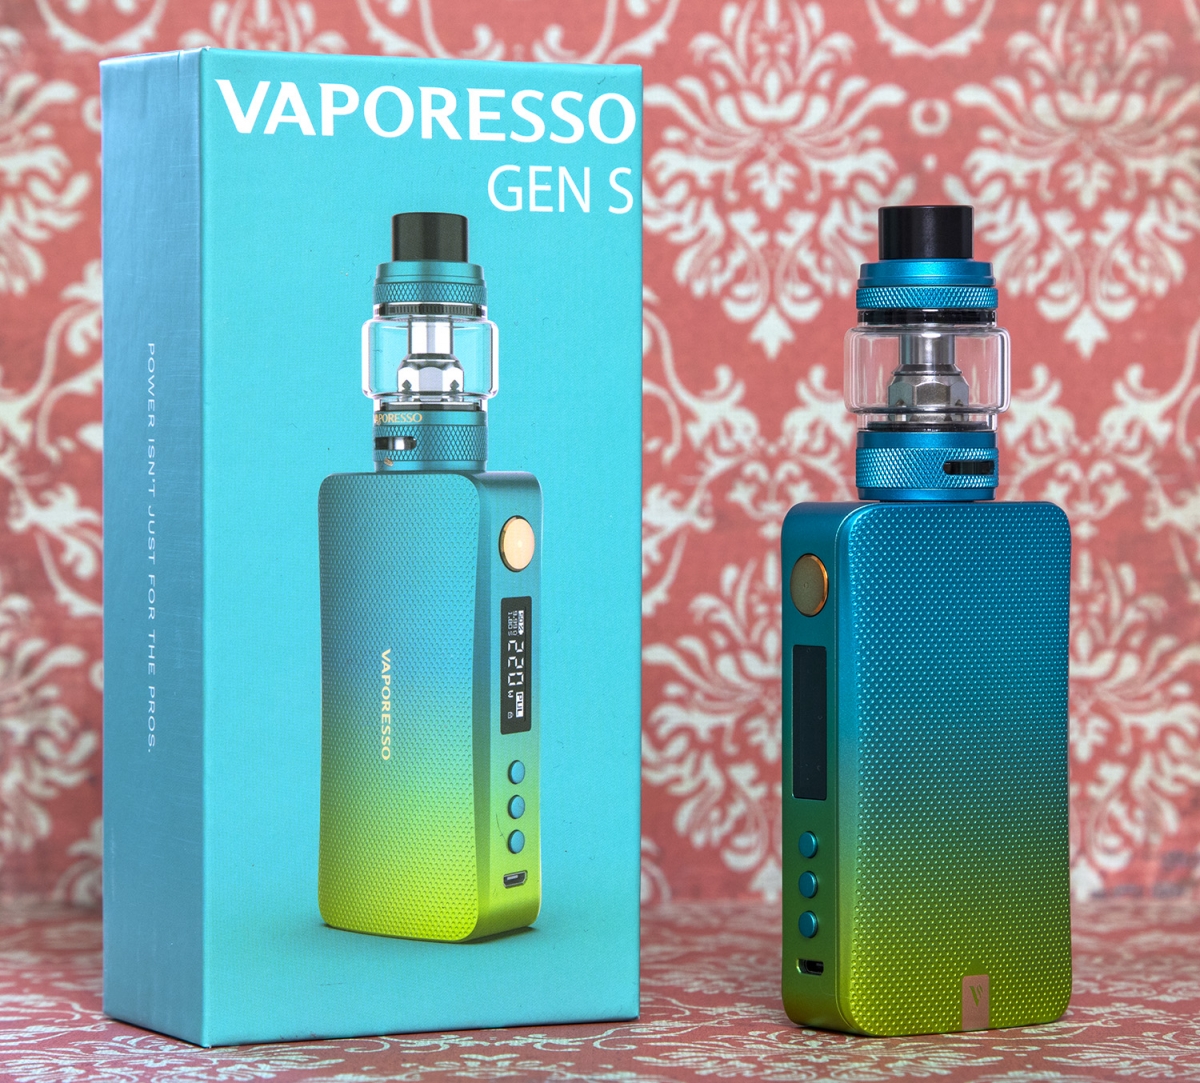 Vaporesso Gen S and NRG Tank Kit with box